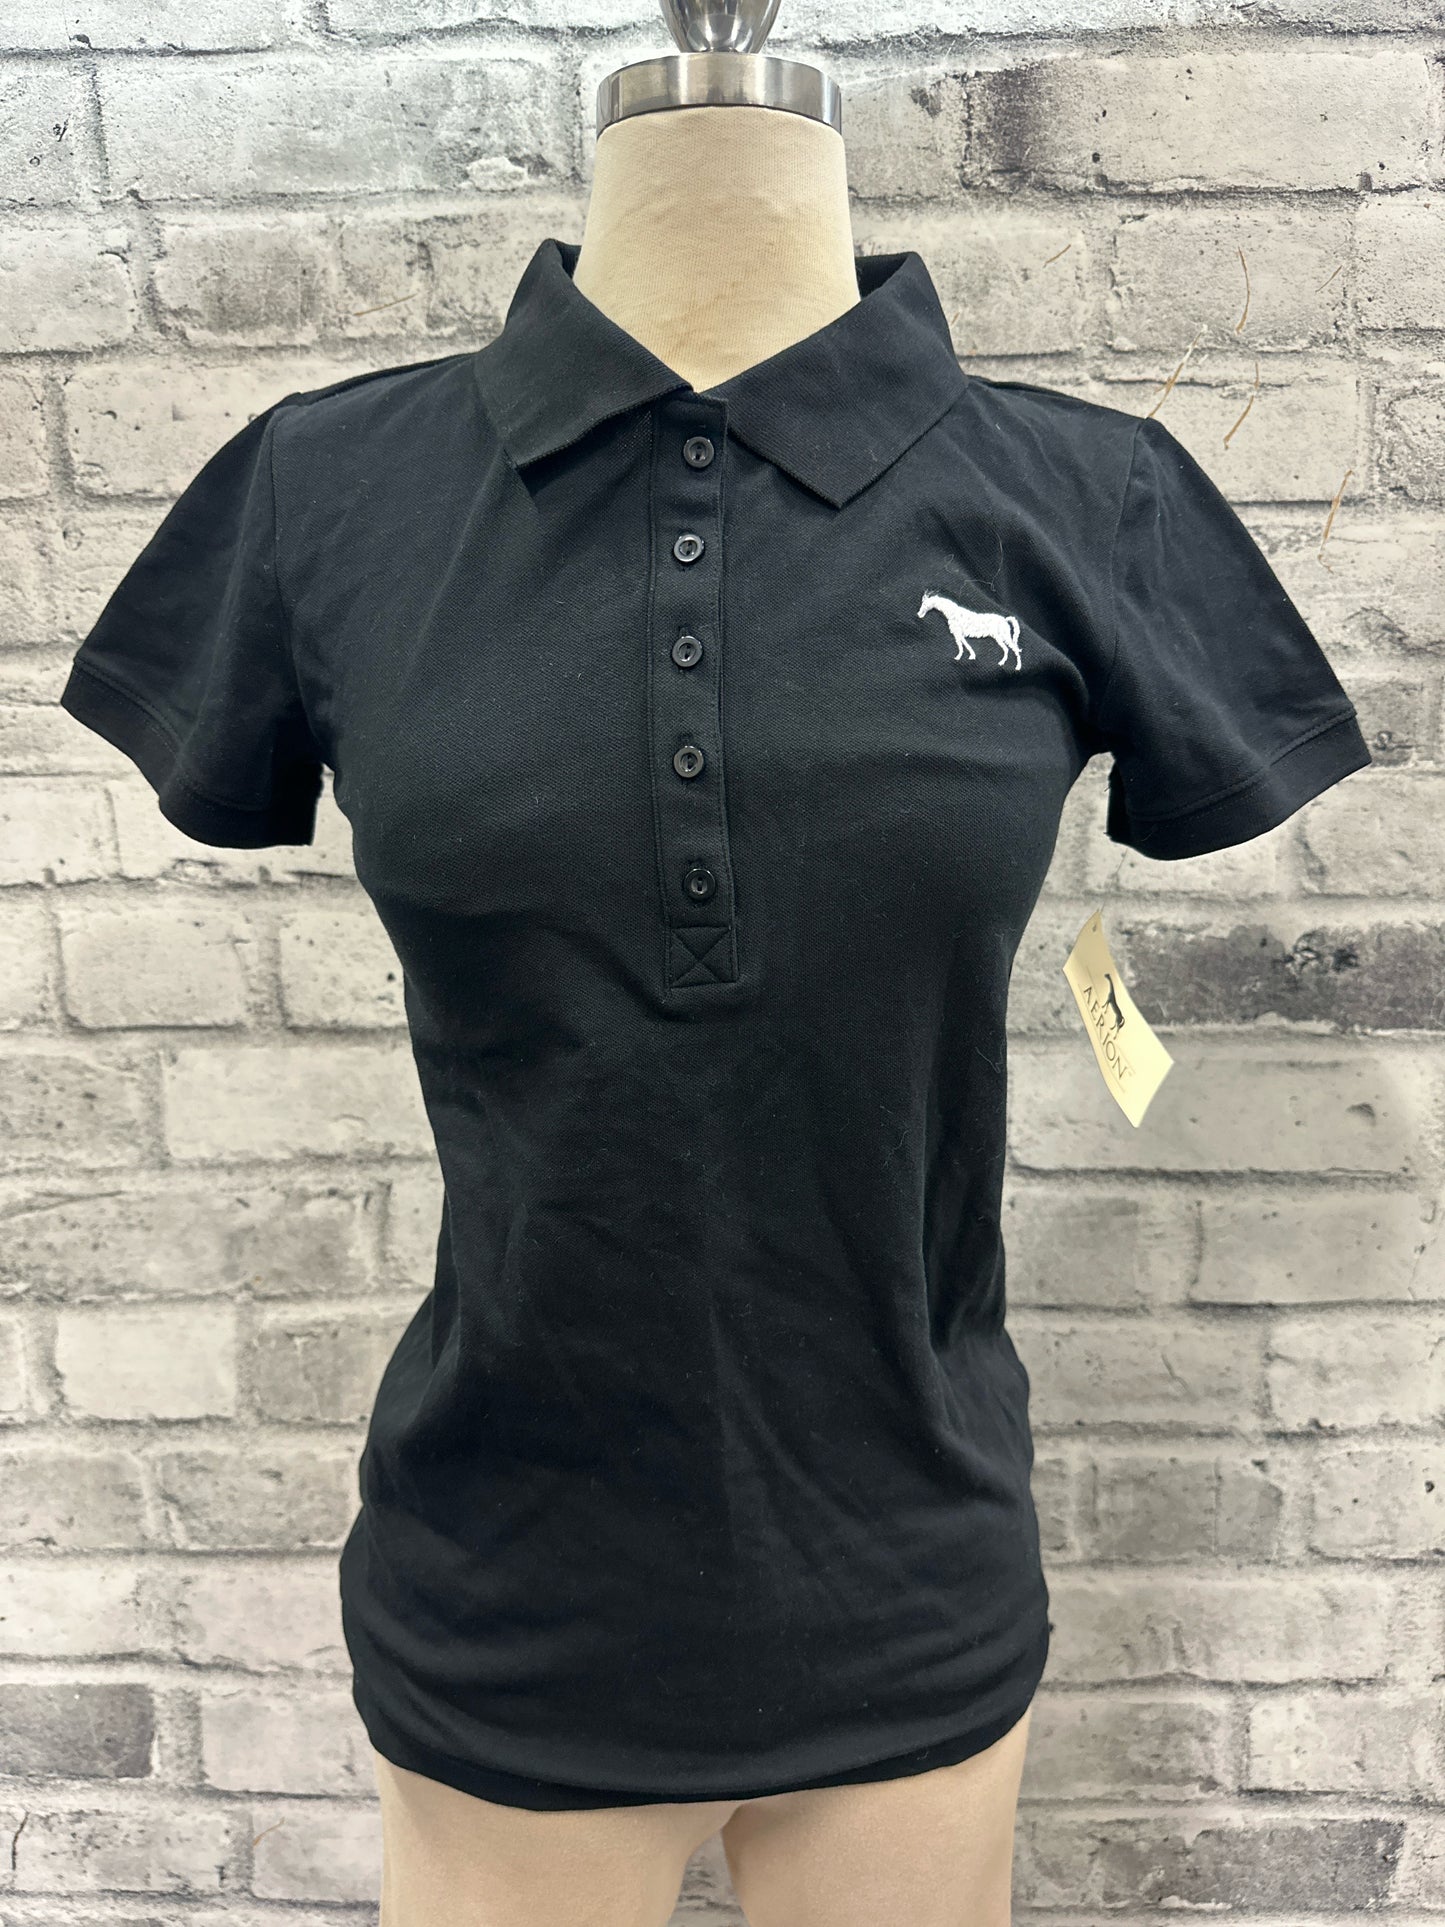 Aerion SS Polo Shirt Black S NEW